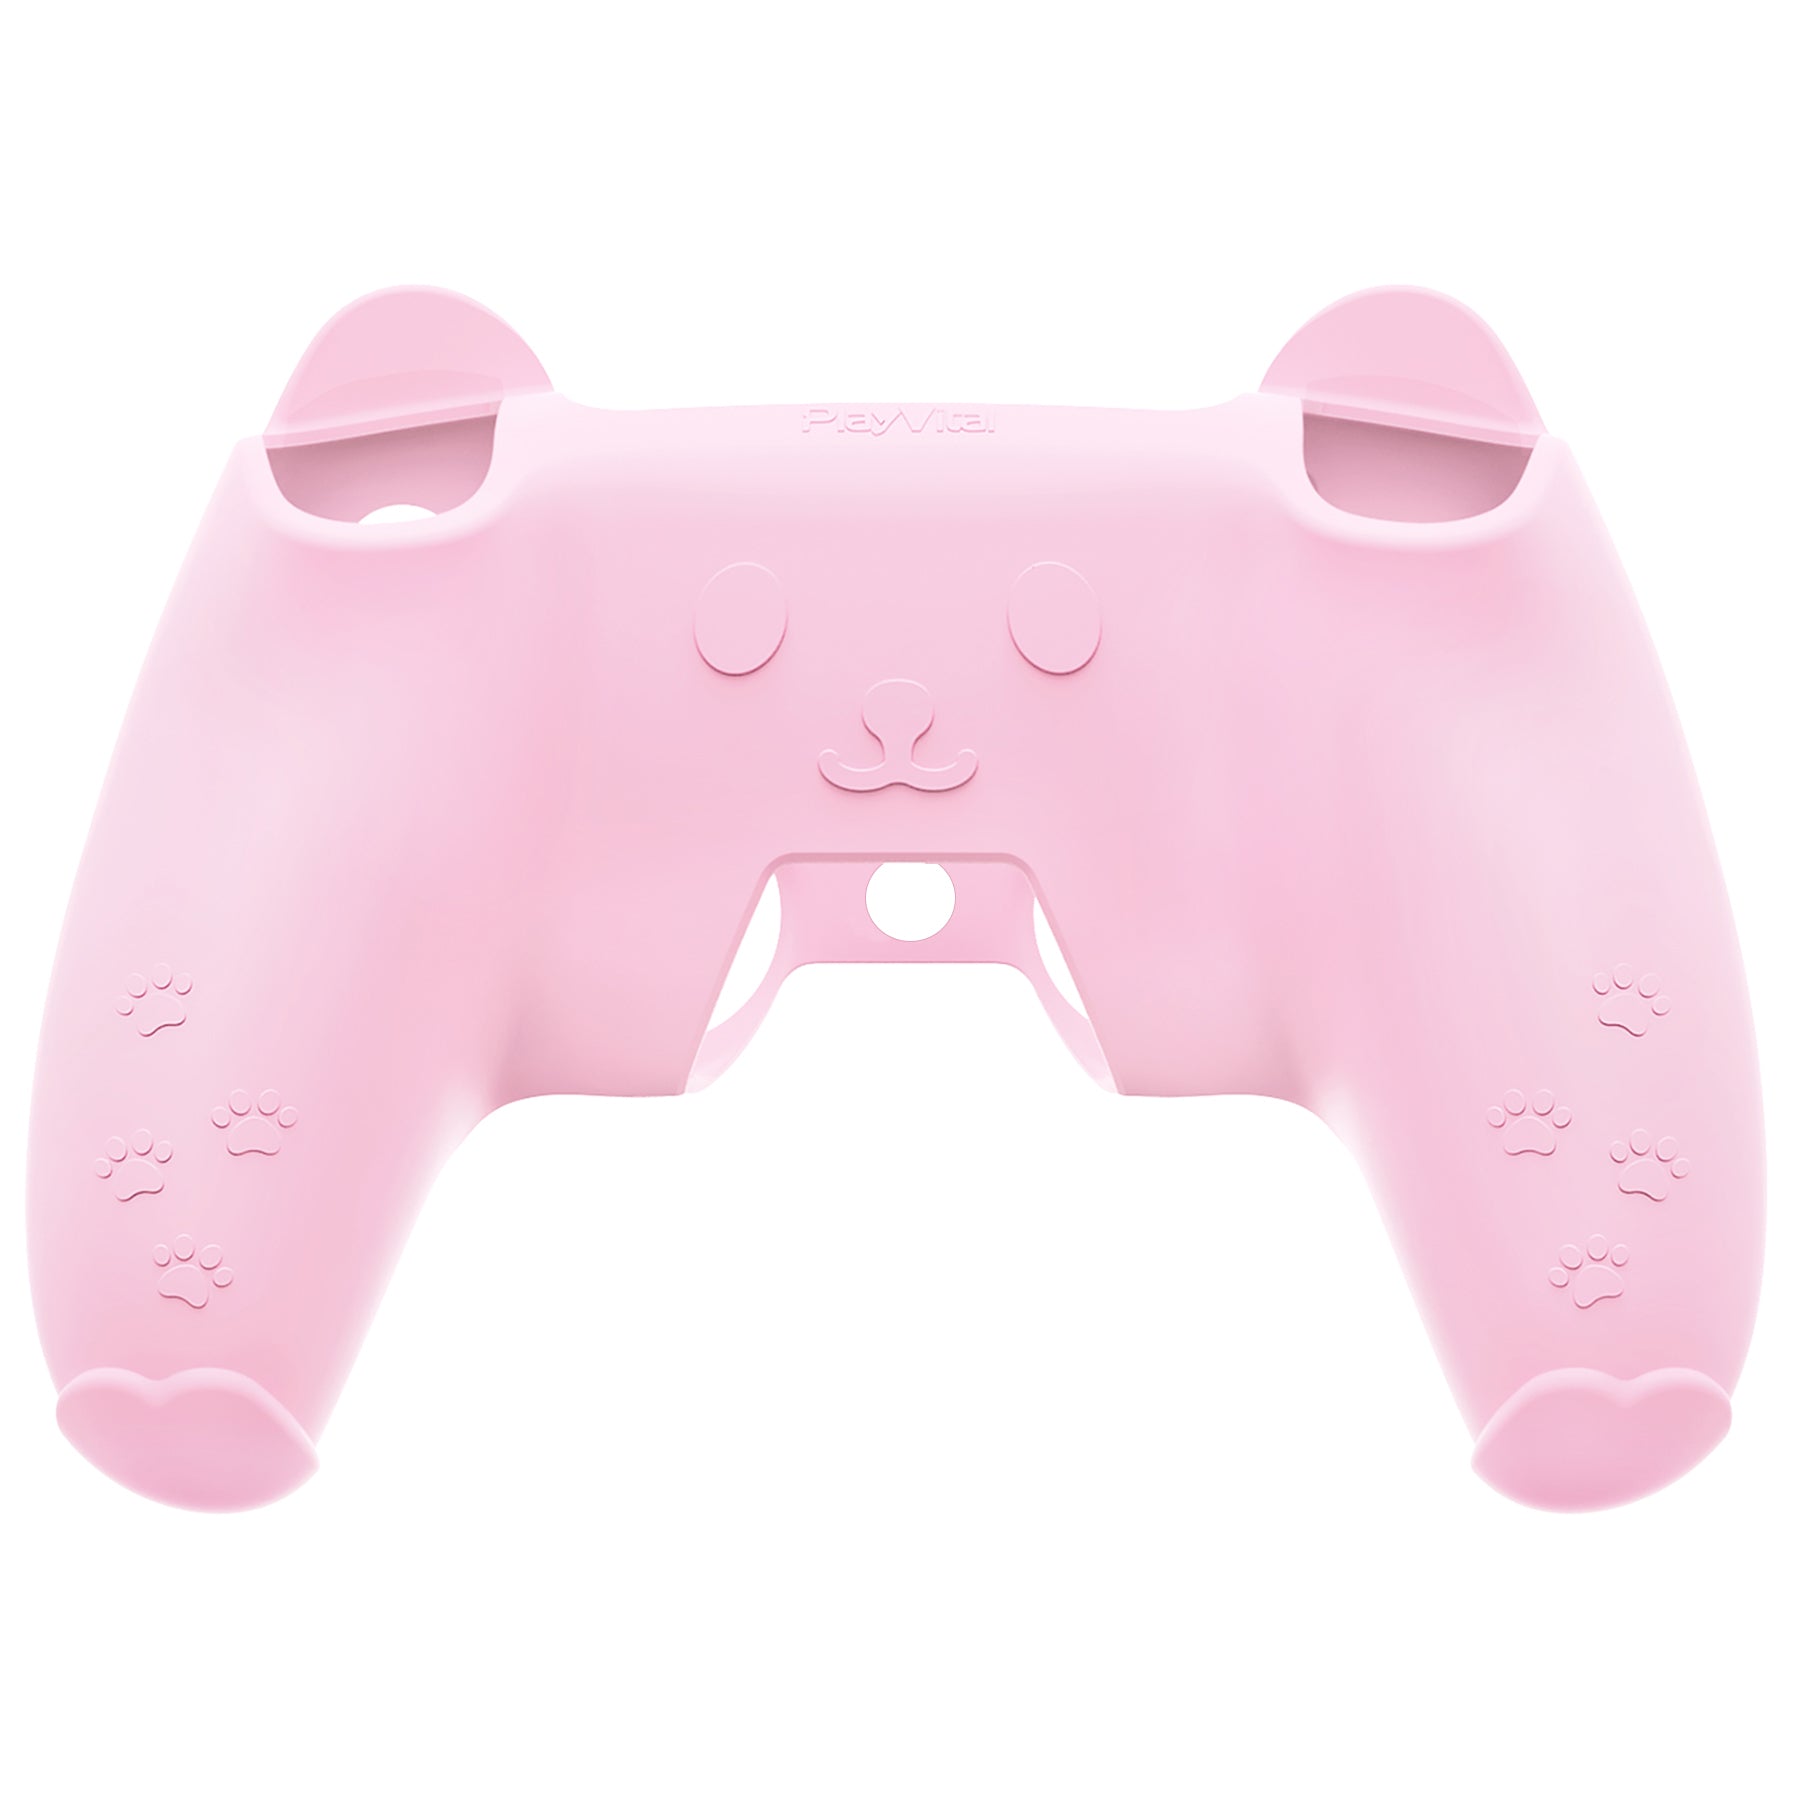 PlayVital Cute Bear Controller Silicone Case with Thumb Grips for PS5 Wireless Controller, Compatible with Charging Station - Pink & Yellow - UYBPFP002 PlayVital